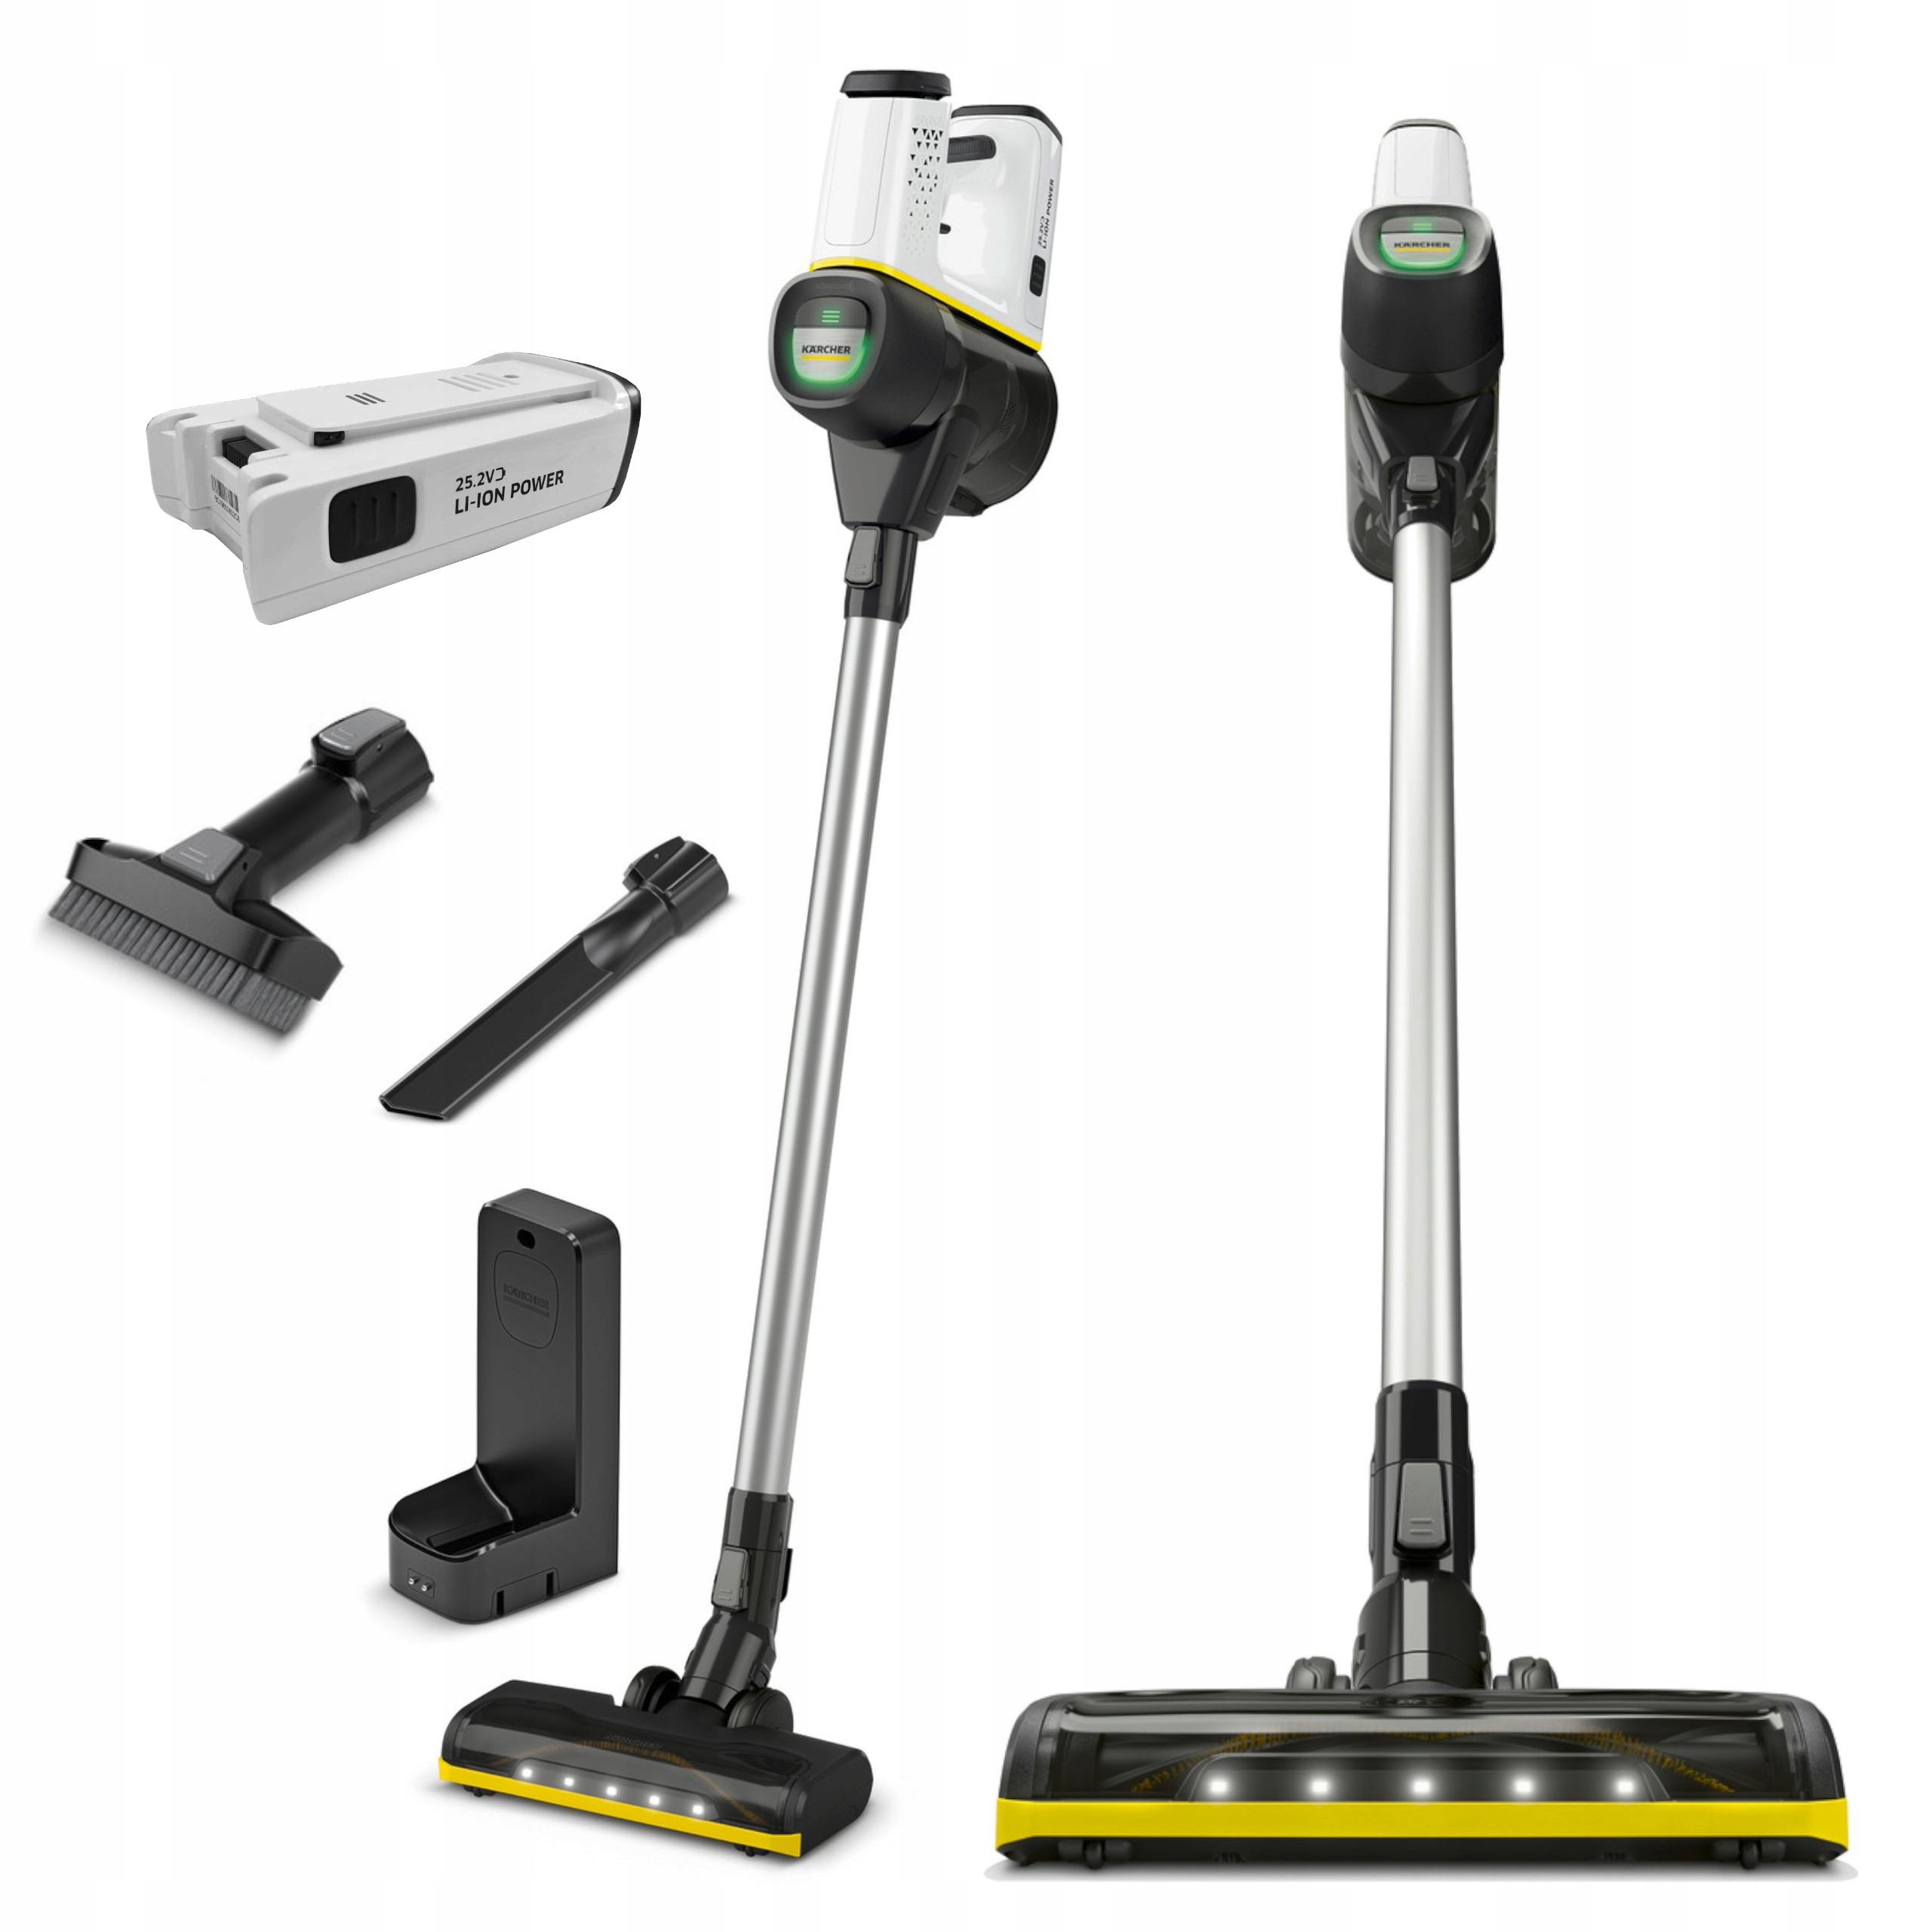 VC 6 Cordless ourFamily